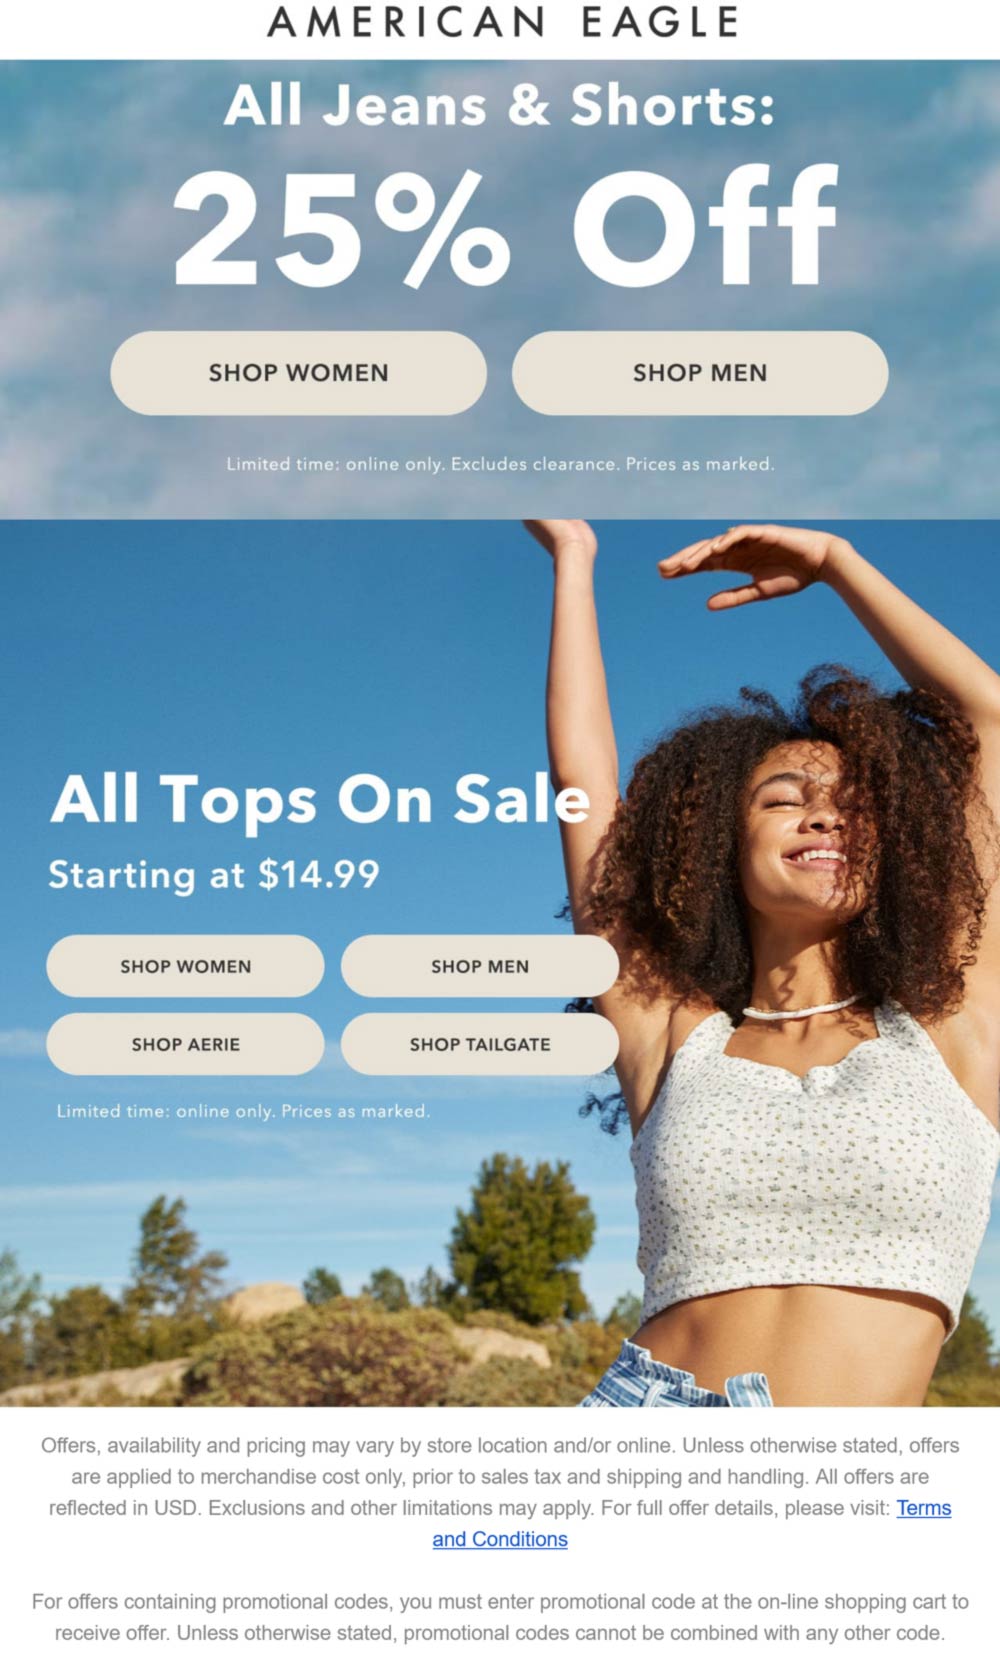 American Eagle stores Coupon  25% off all jeans & shorts online at American Eagle #americaneagle 